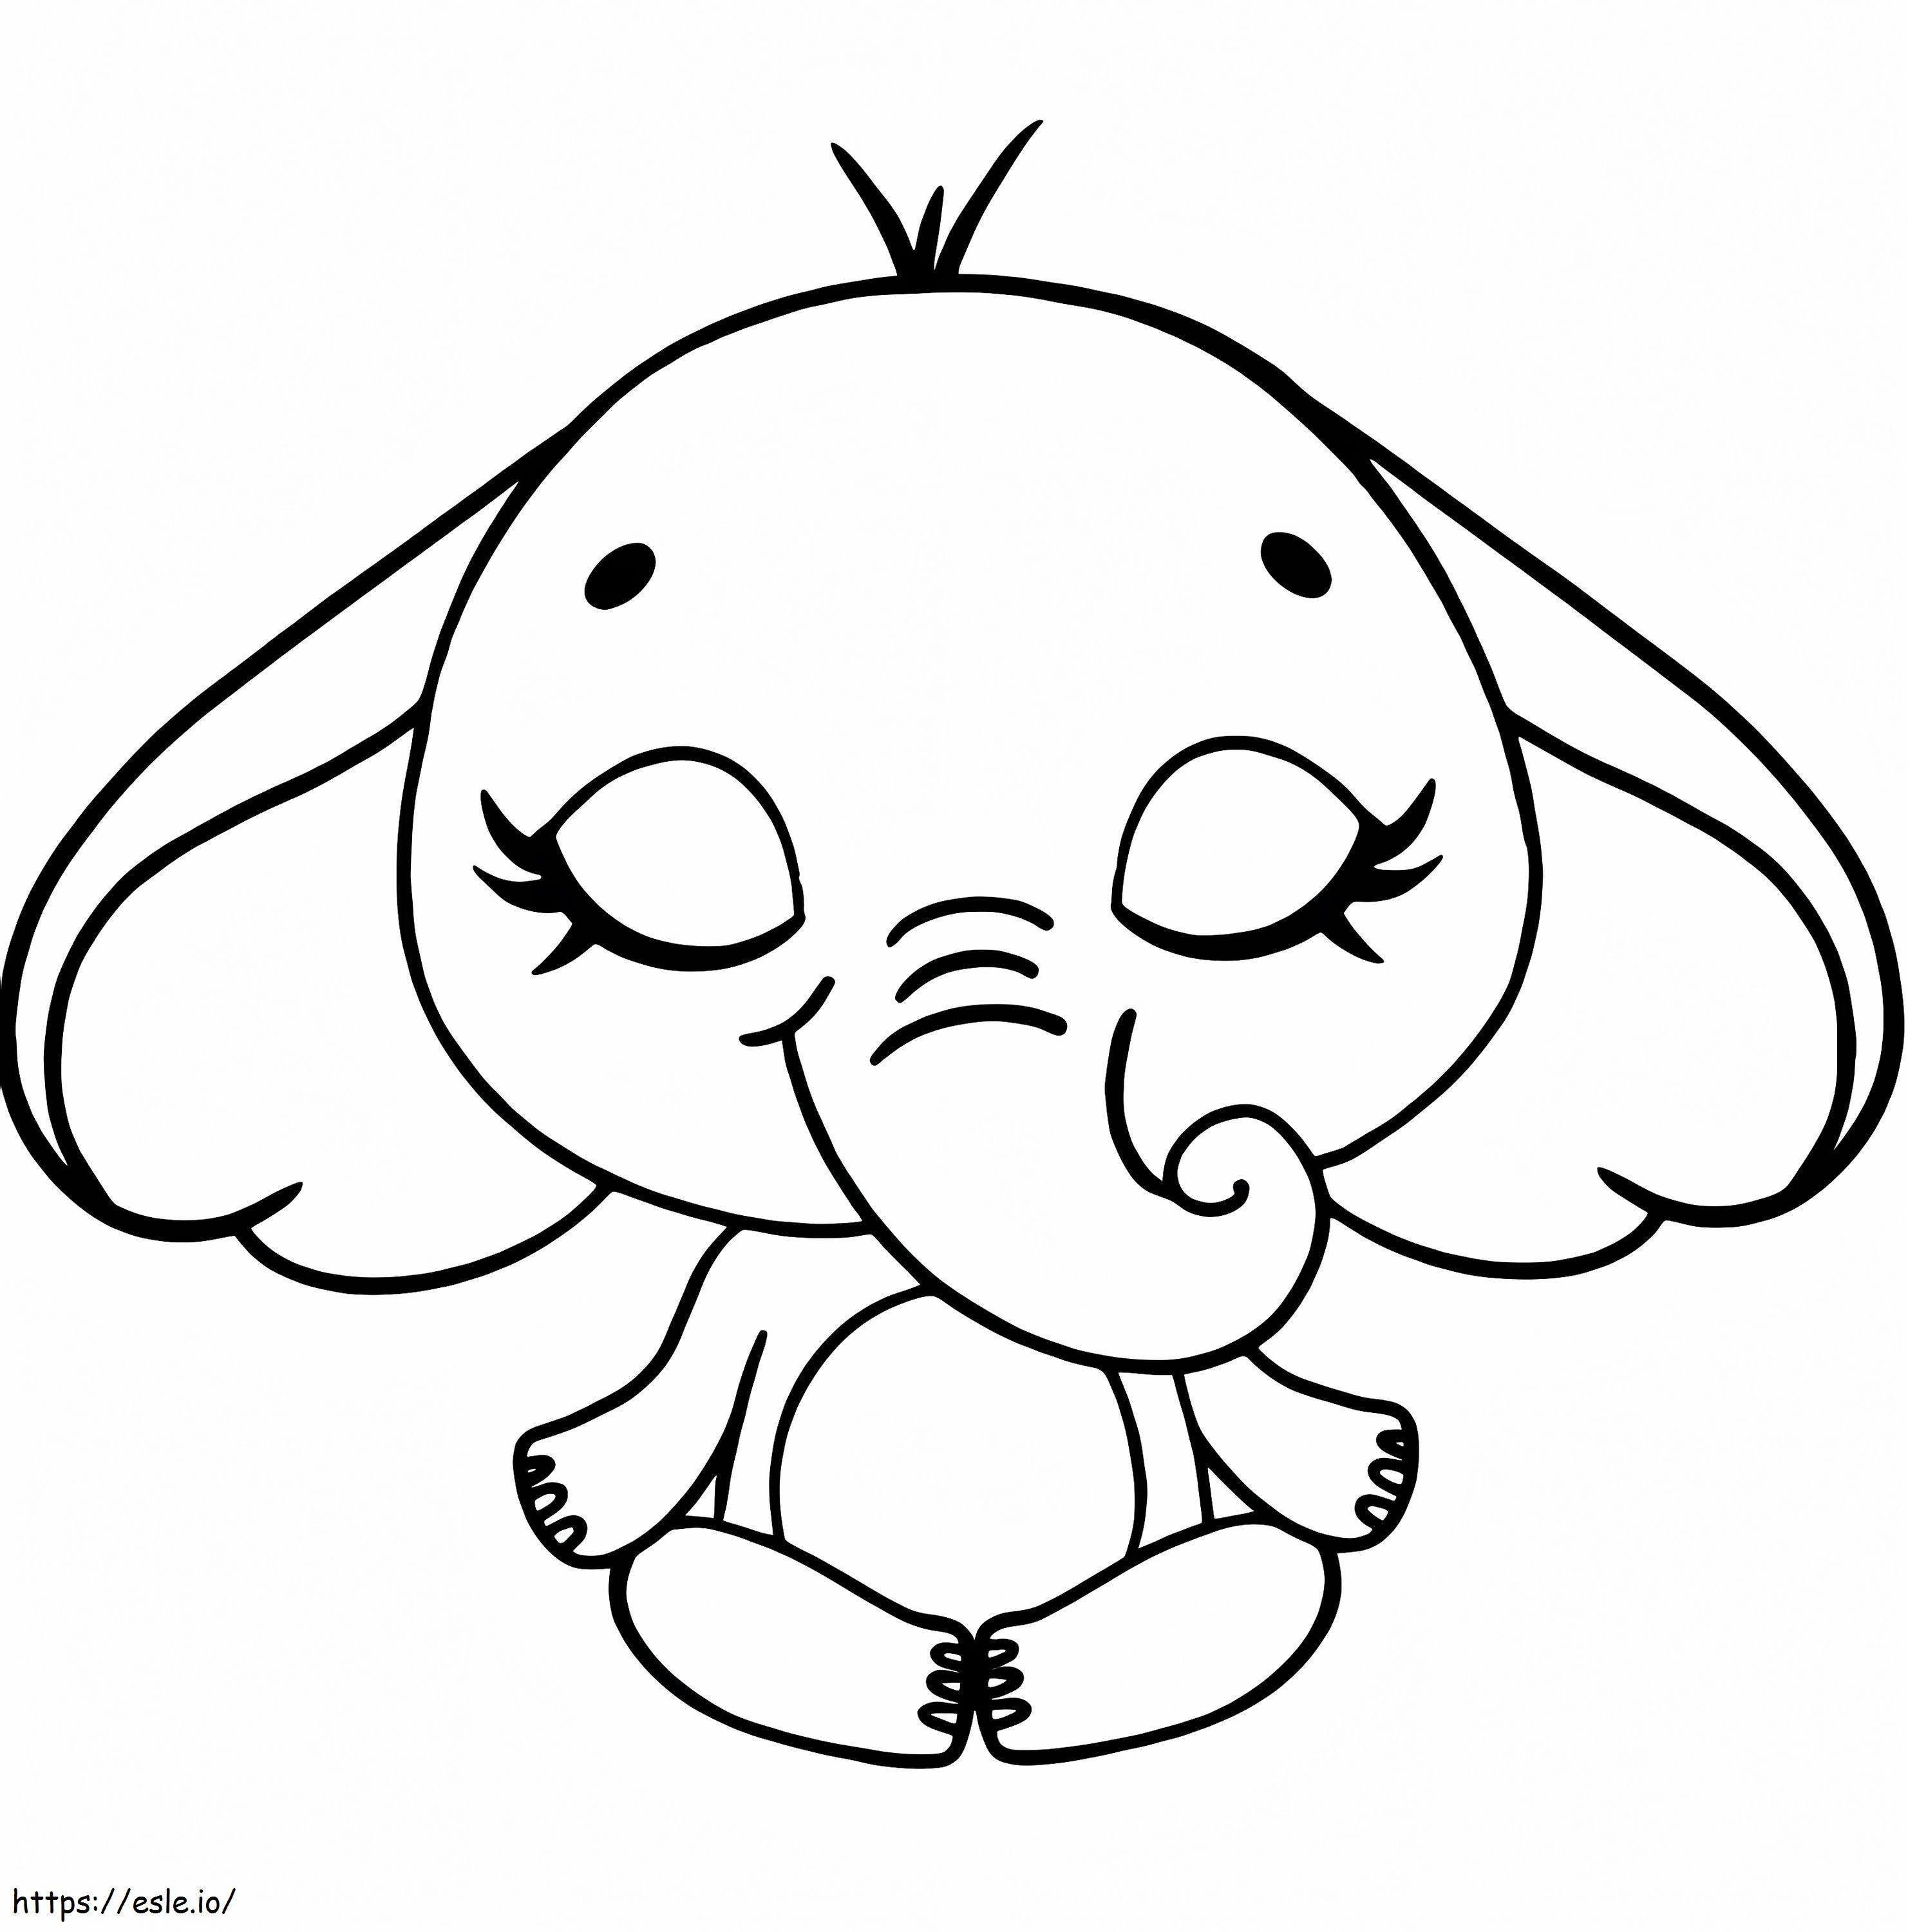 Cute Elephant Doing Yoga coloring page